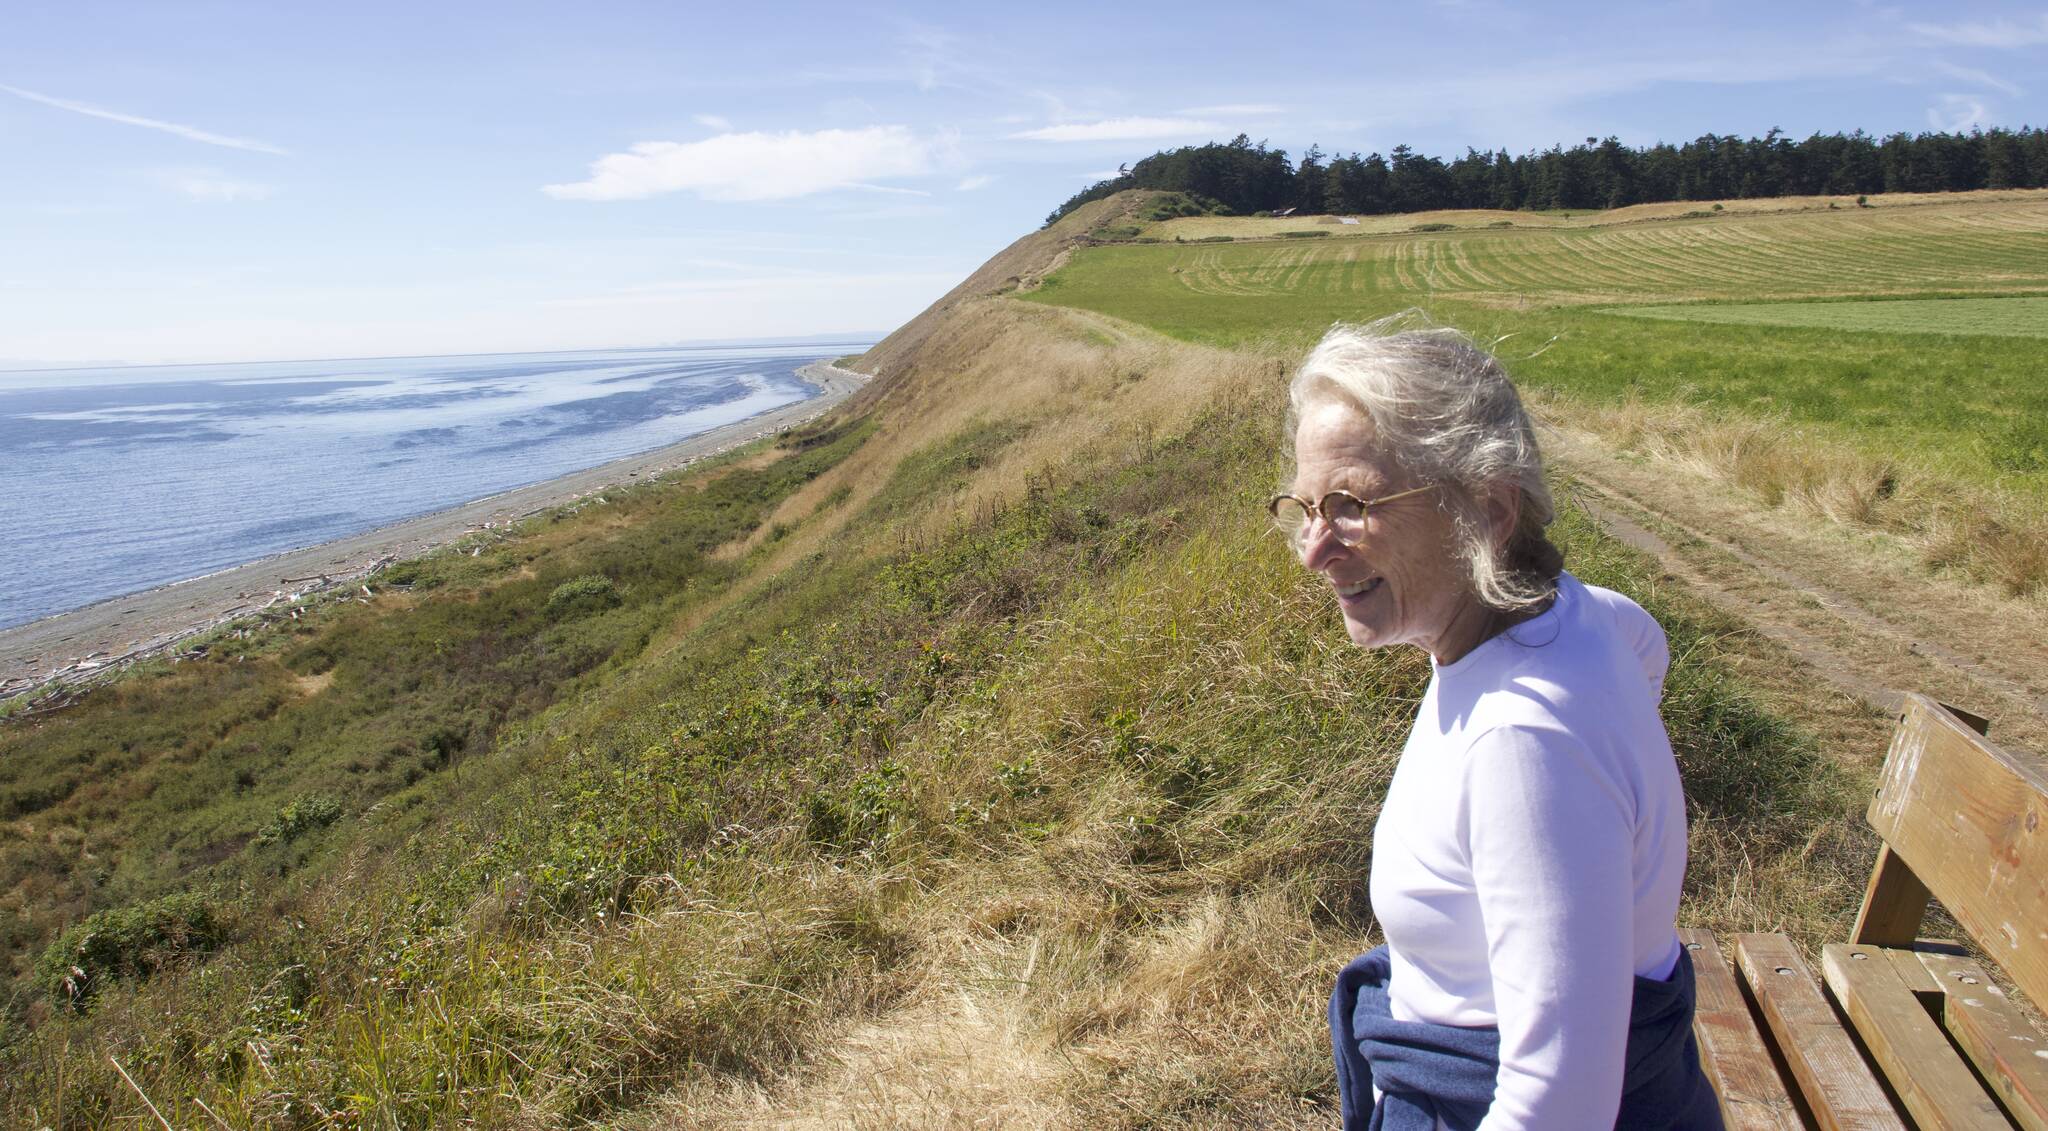 Lynn Hyde, director of Historic Whidbey, looks over Ebey's Landing where the history walk is taking place. (Phot by Rachel Rosen/Whidbey News-Times)